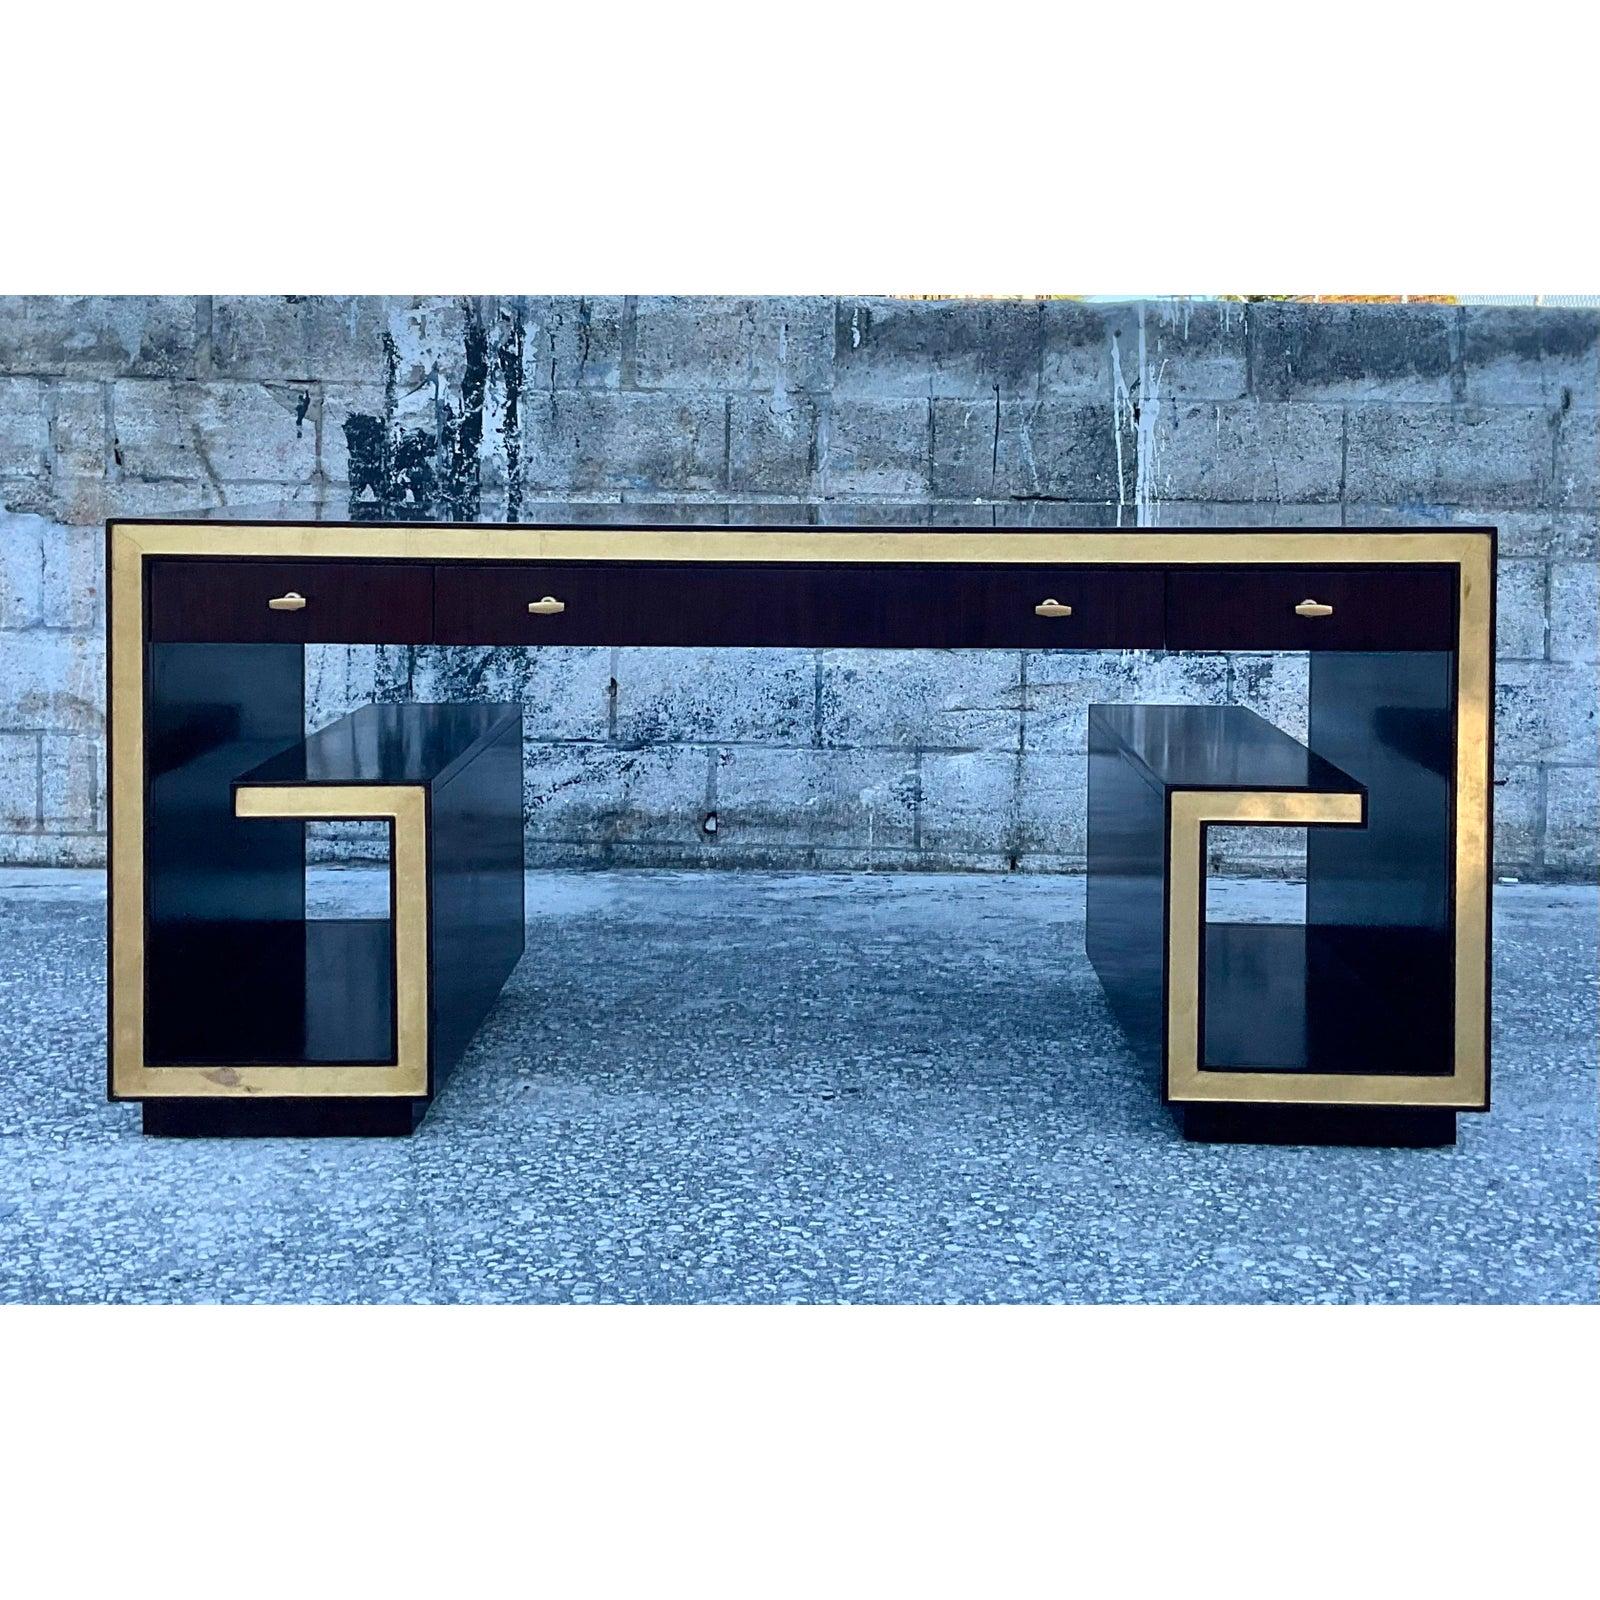 Incredible vintage Greek key executive desk. Made by the iconic Sligh group. Gorgeous gilt detail highlights the rich wood grain. Drop down front drawer panel for easy keyboard use. A real showstopper. Beautiful from both sides so will sit easily